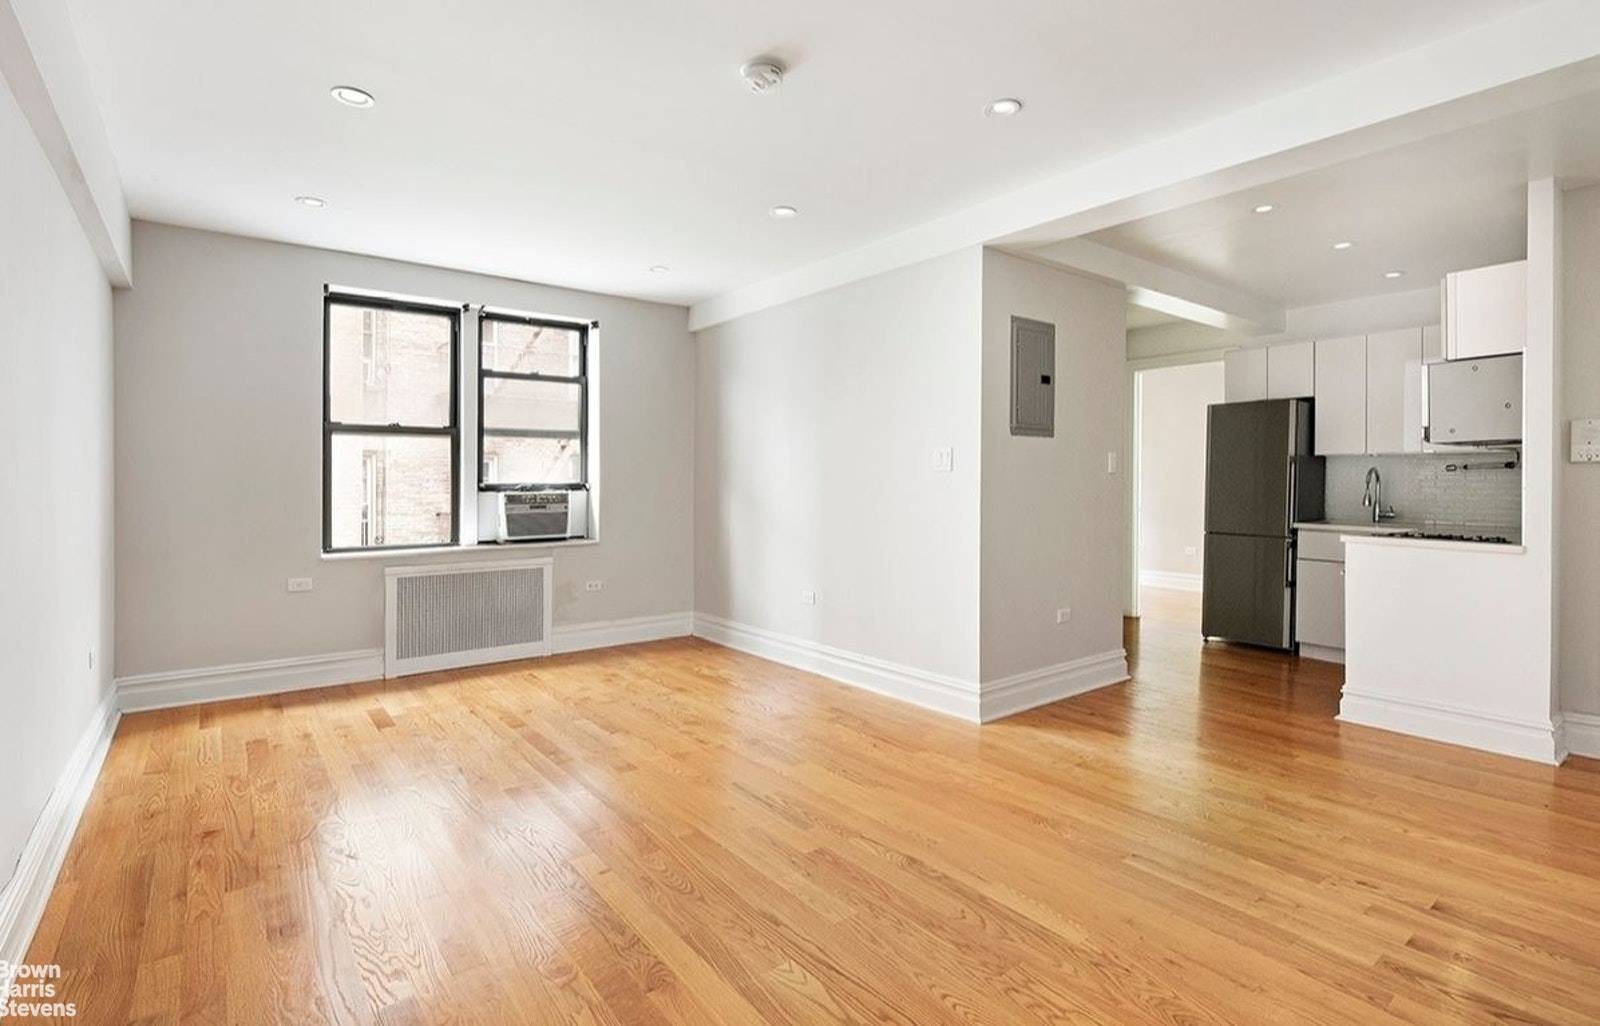 Shown by appointment only, this large one bedroom is pristine, in an all new modern renovation.